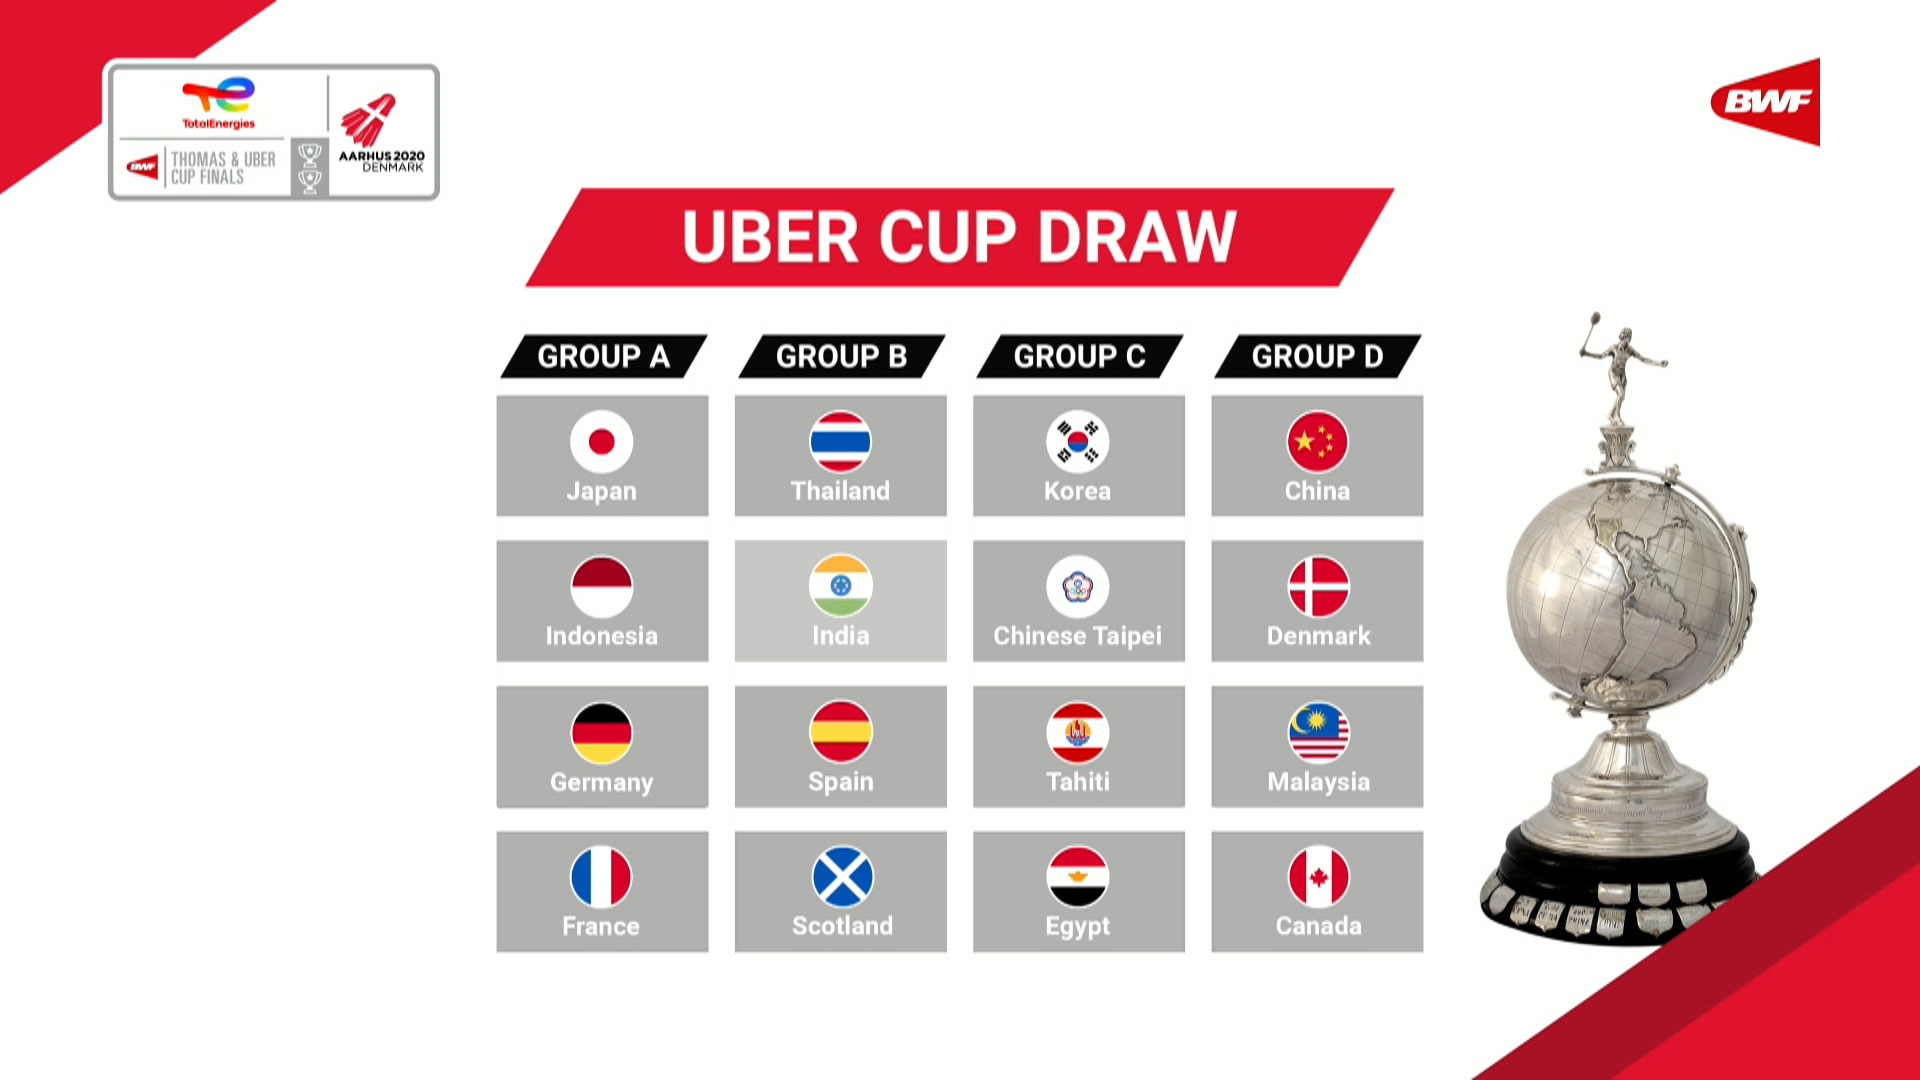 Uber cup 2021 live